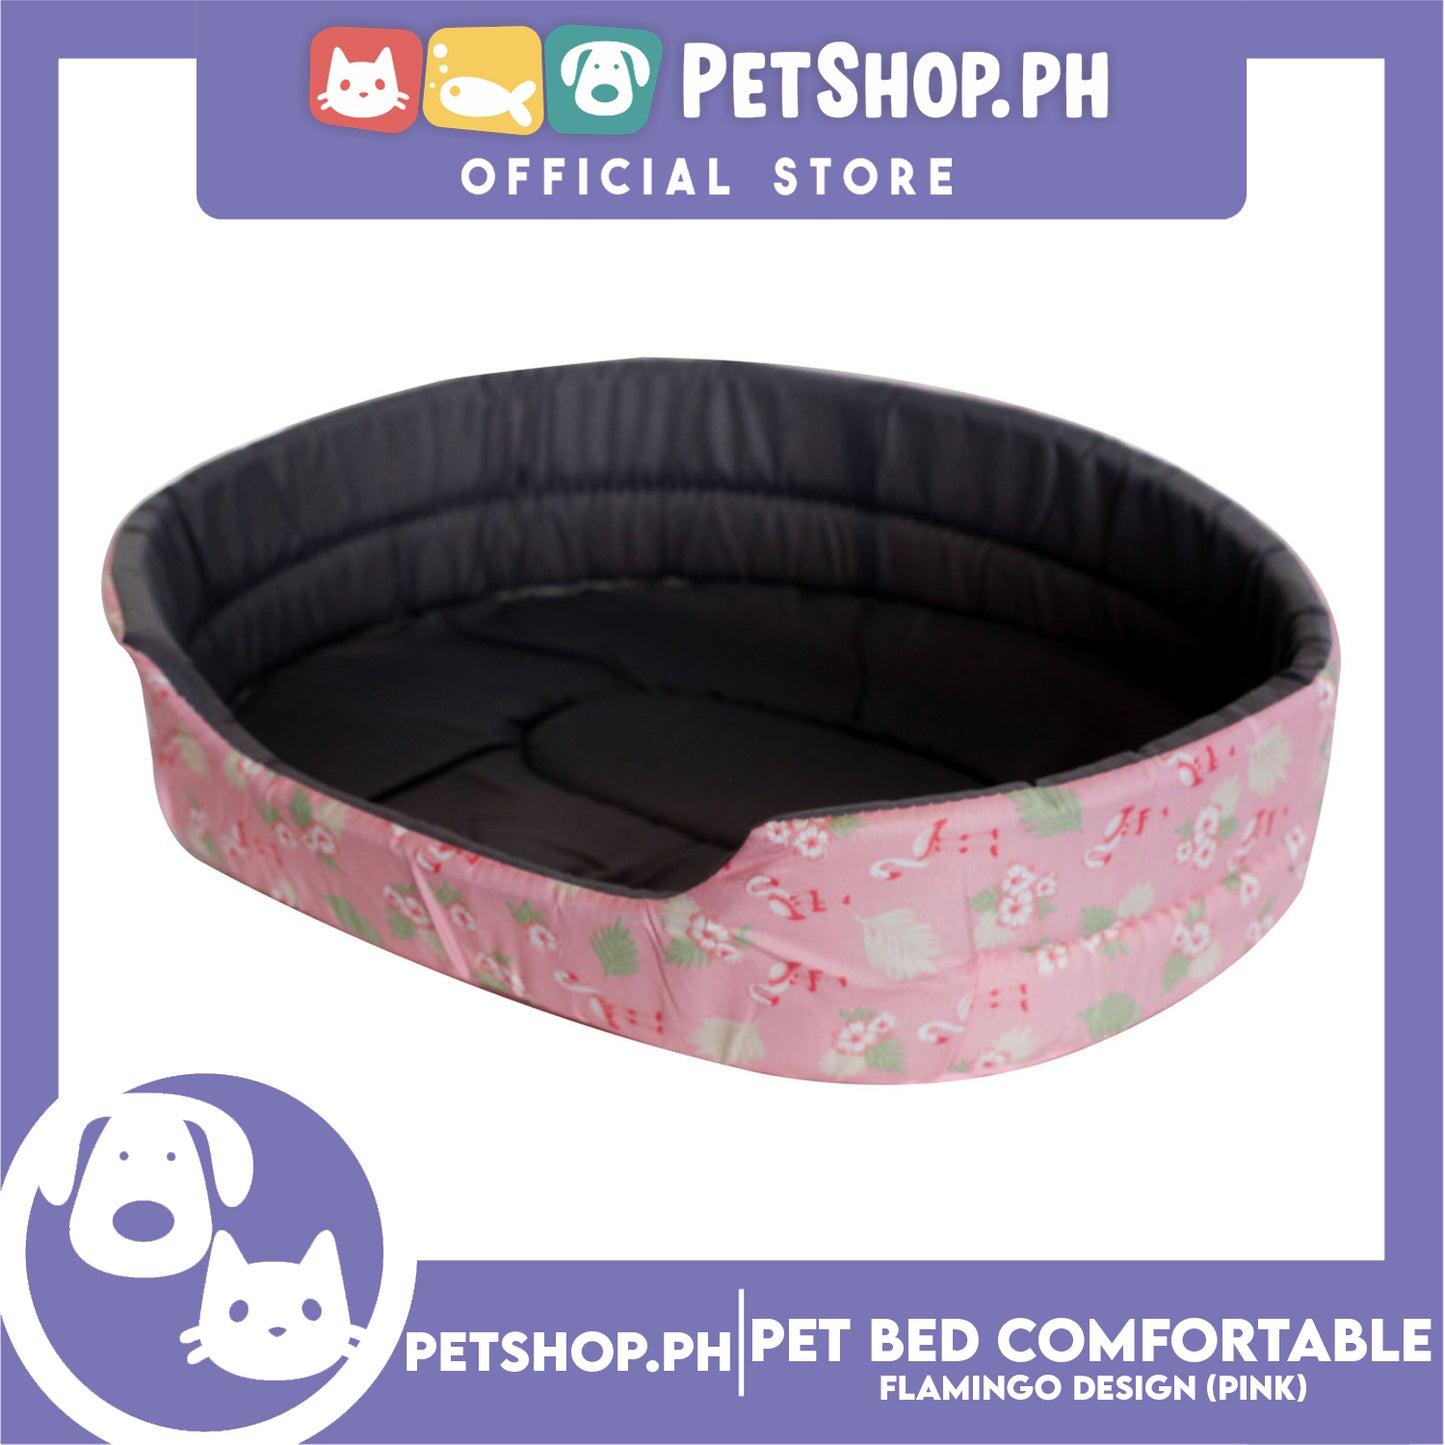 Pet Bed Comfortable Sleeping Bed with Flamingo Design 47x36x11cm for Dogs & Cats Pink